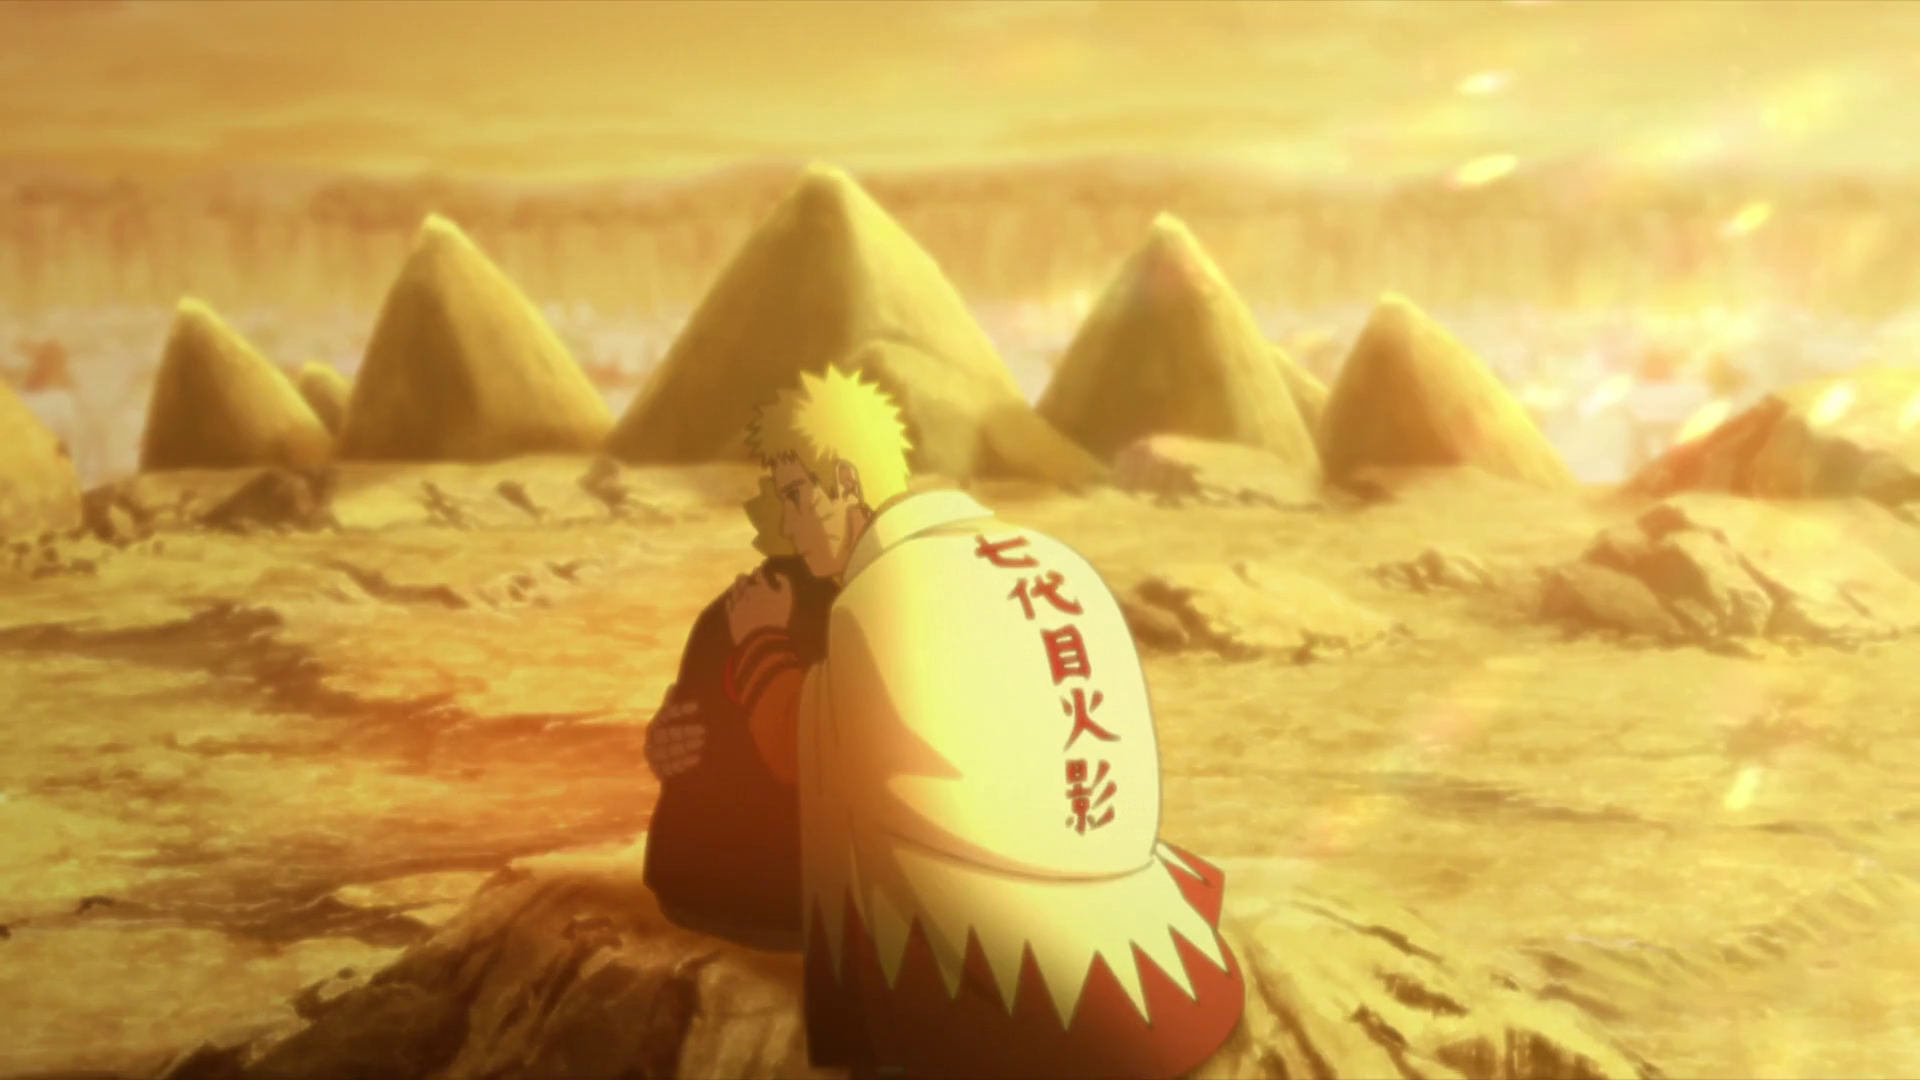 Boruto episode 292 sets up the finale as Naruto's son dies a terrible death